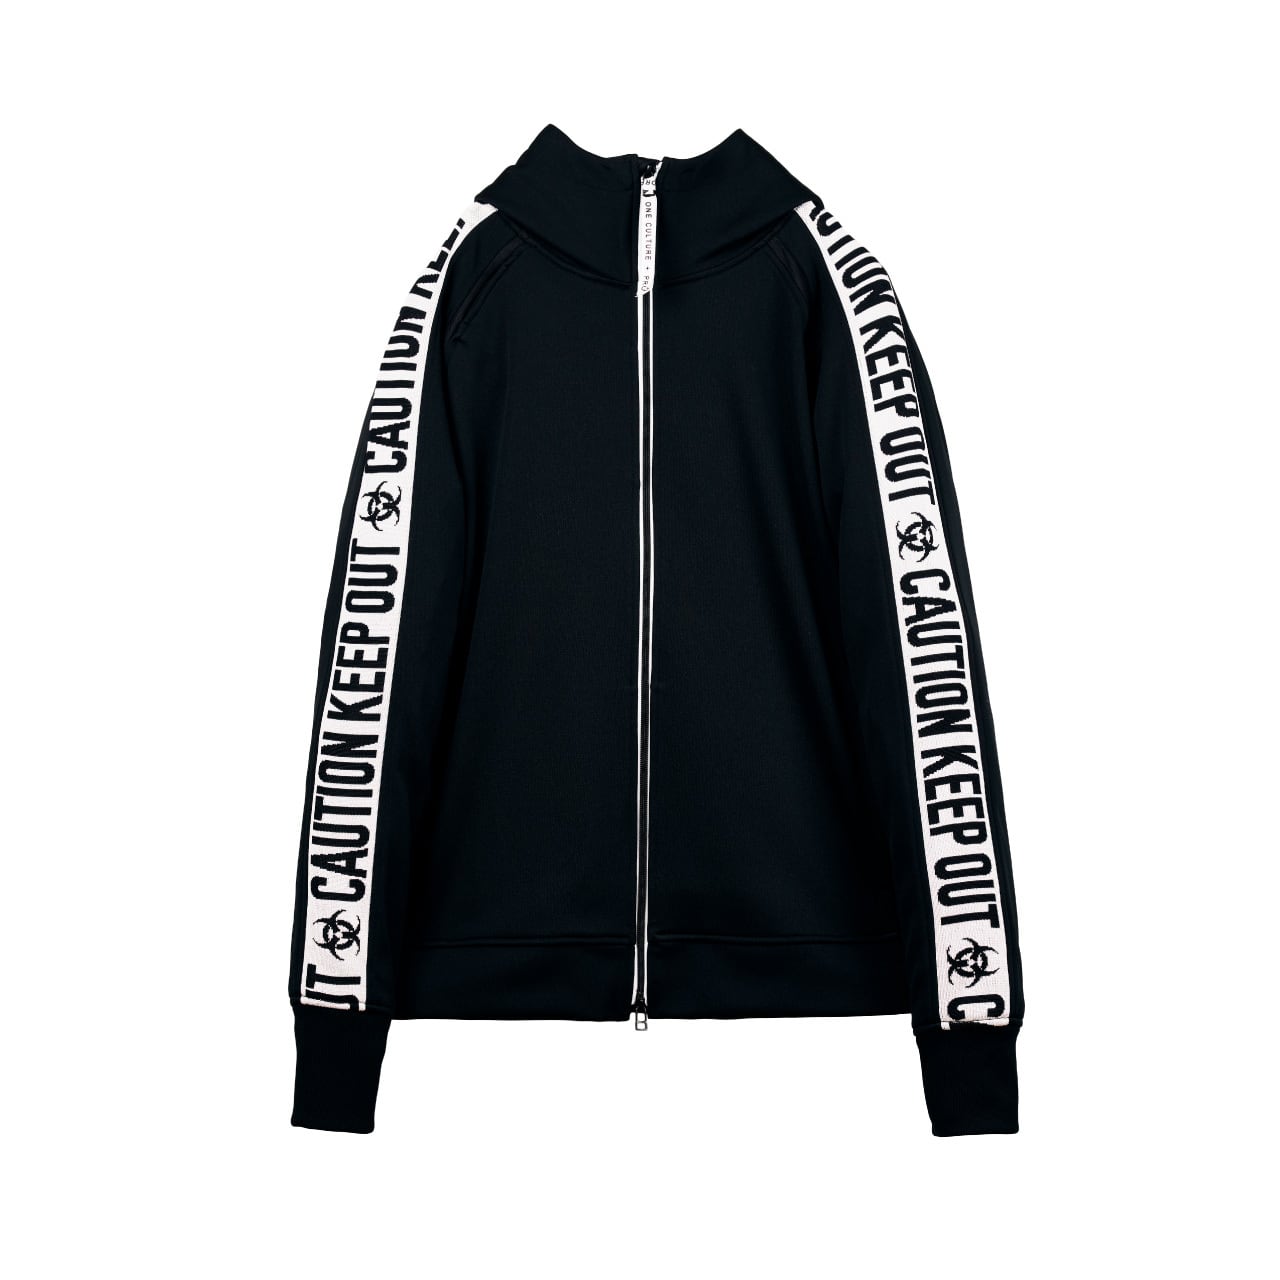 KEEP OUT” HOODED TRACK JACKET (BLACK) | beauty:beast official web shop